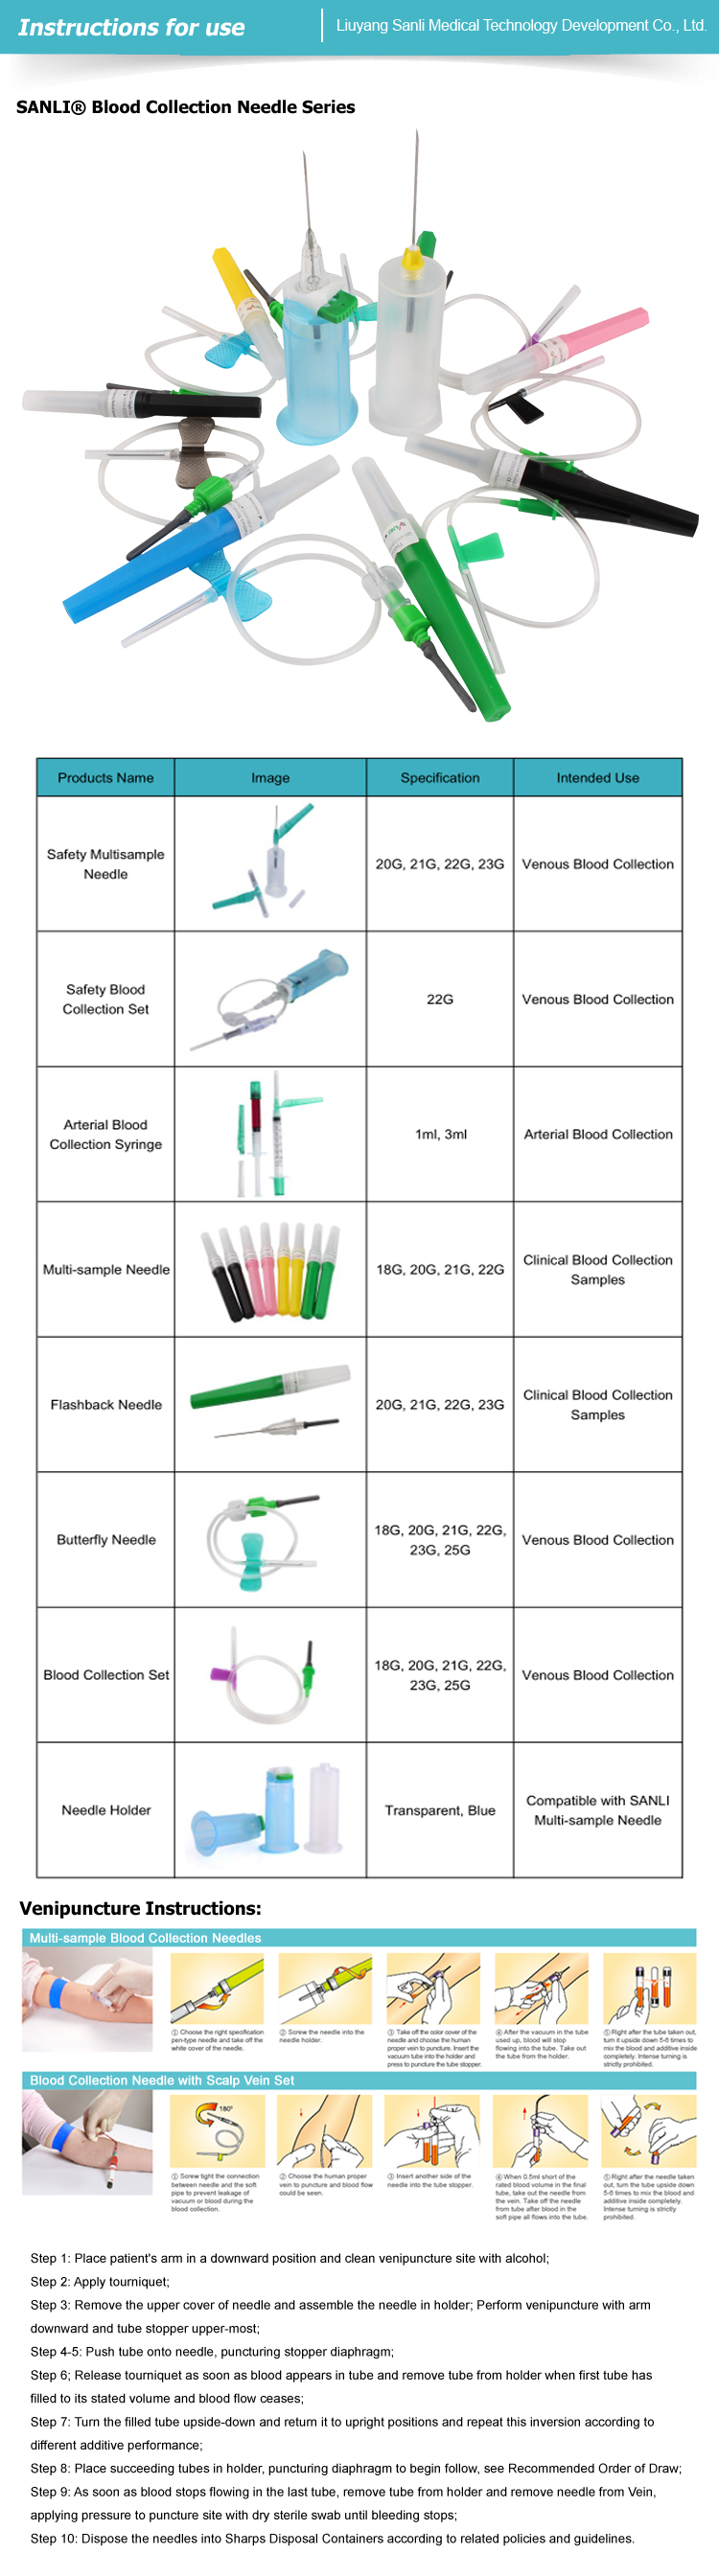 SANLI Blood Collection Needles Guide